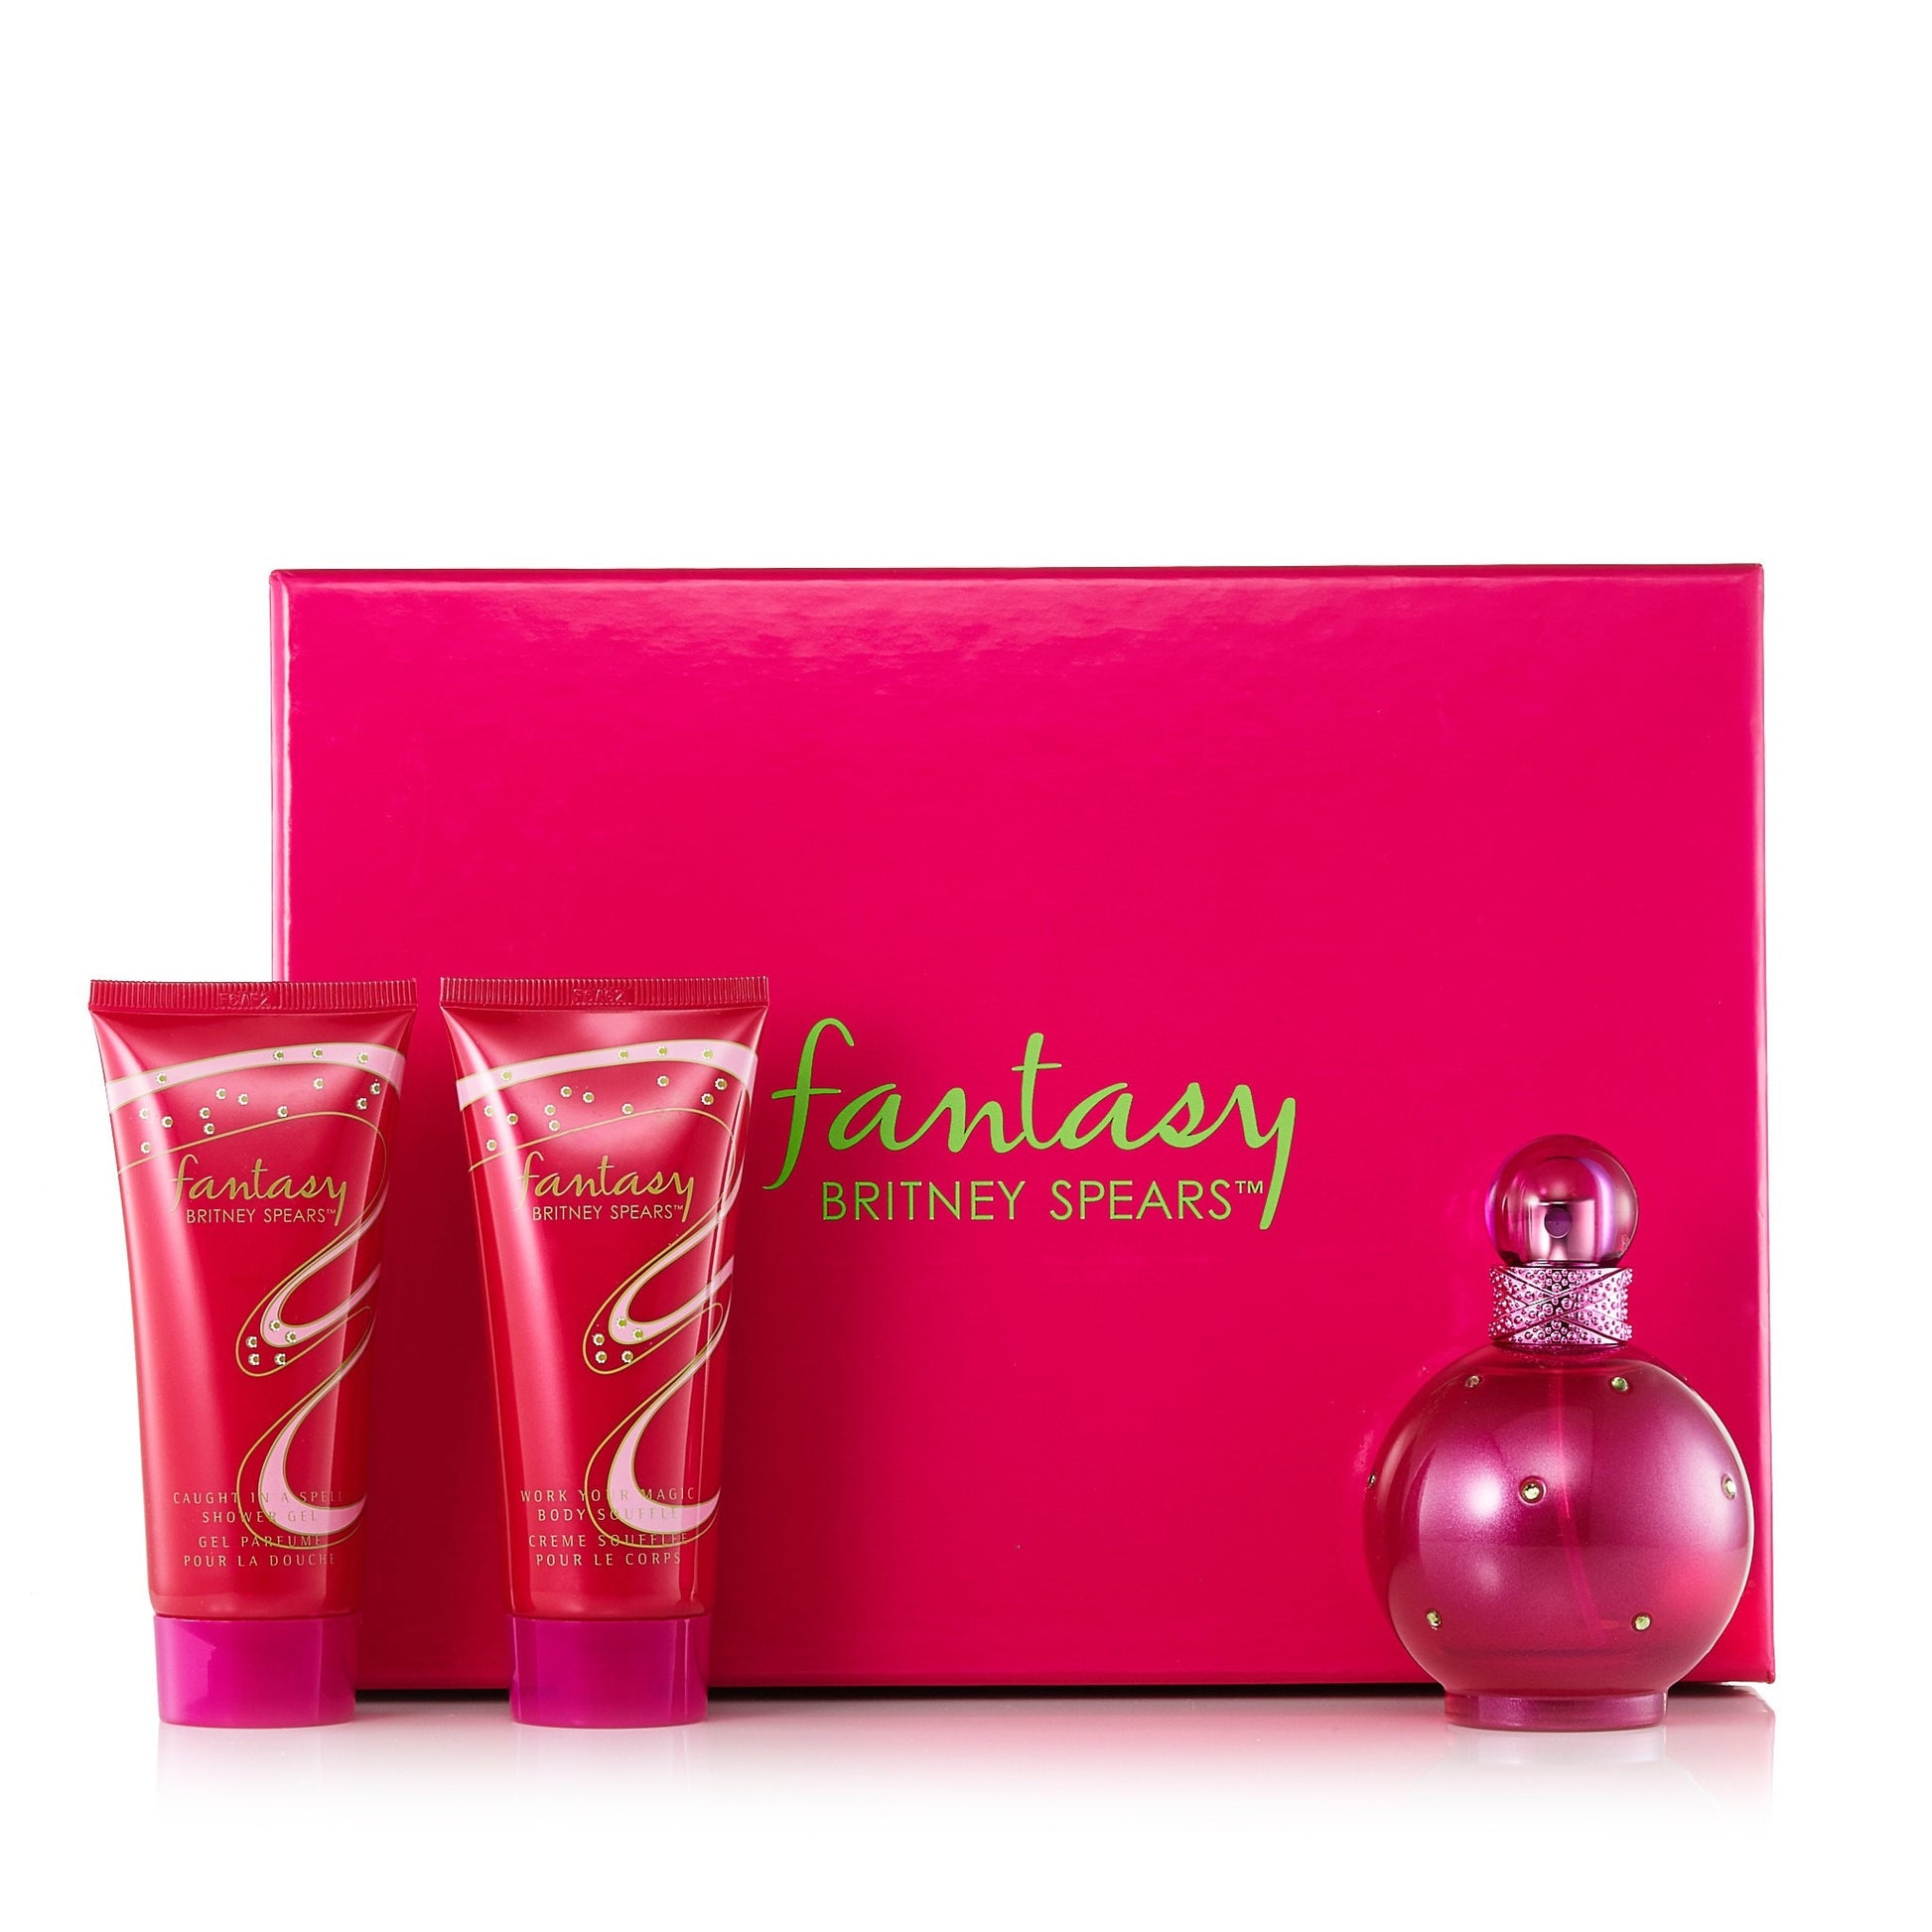 Fantasy Set for Women by Britney Spears, Product image 2